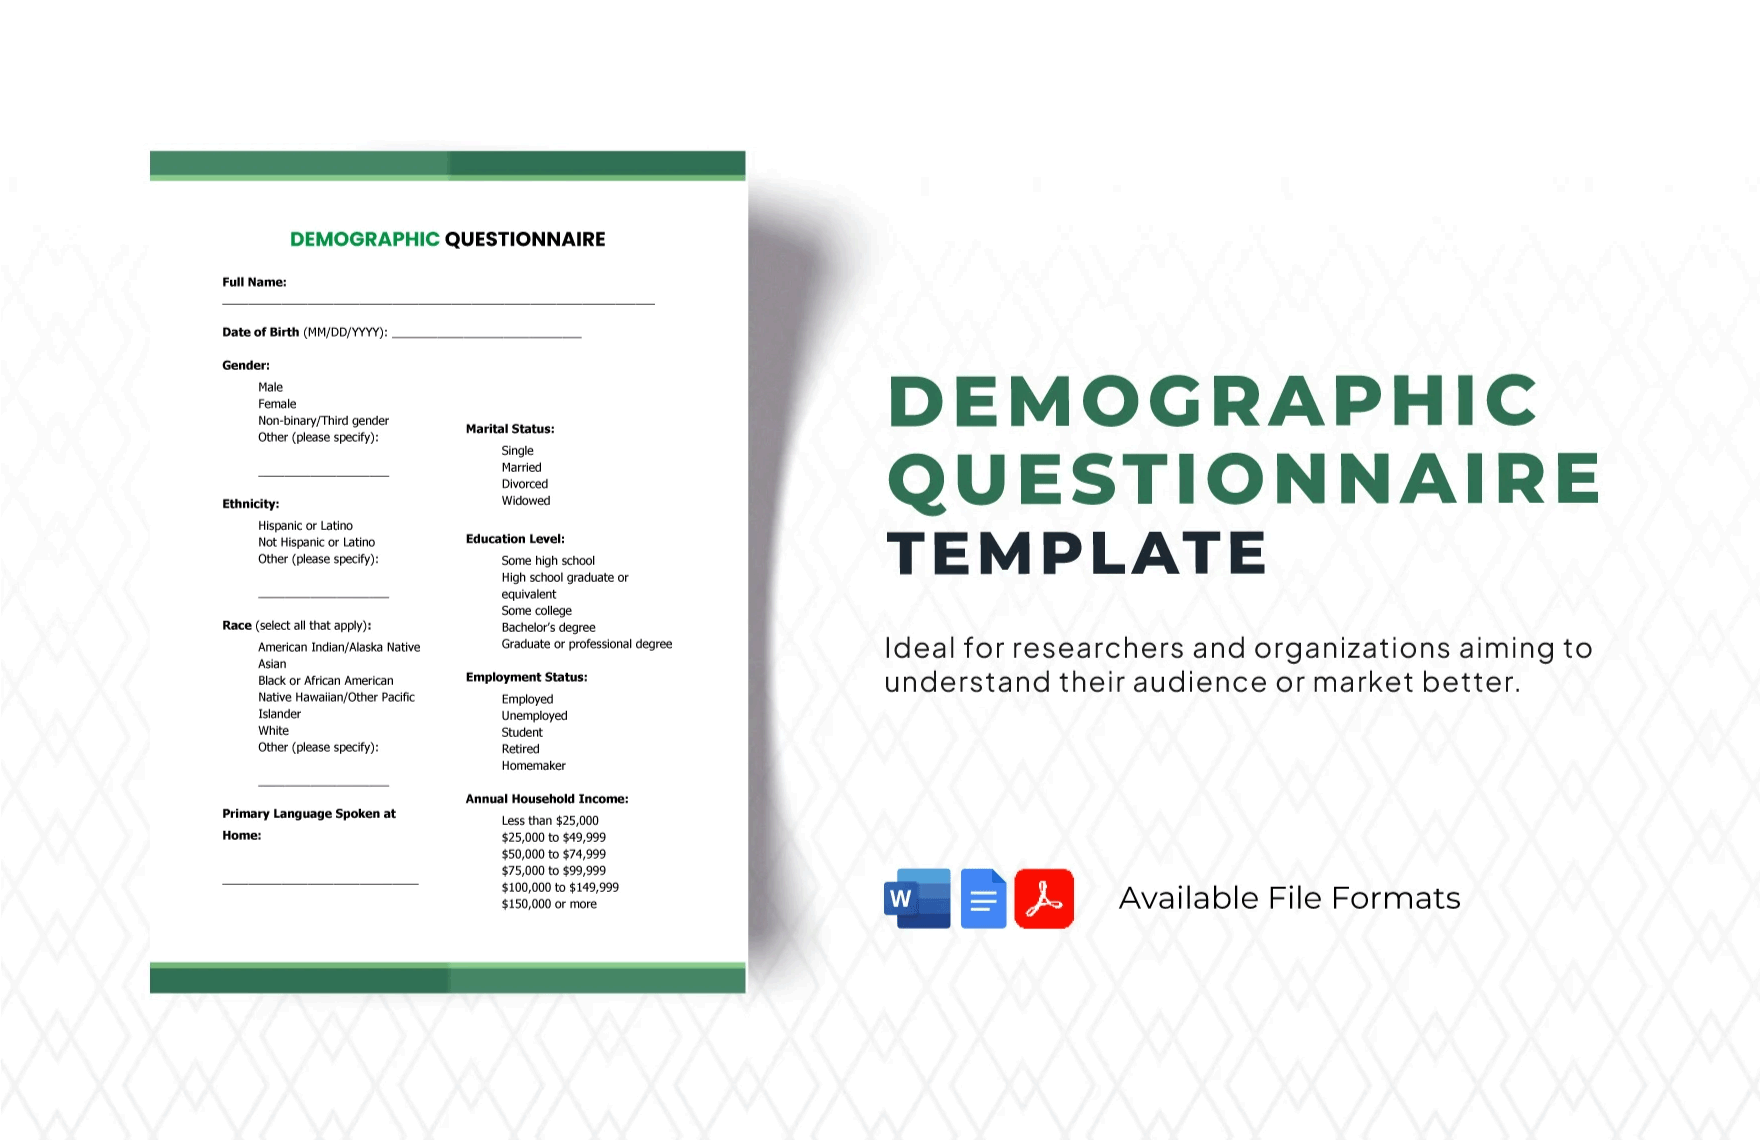 Free Demographic Questionnaire Template in Word, Google Docs, PDF